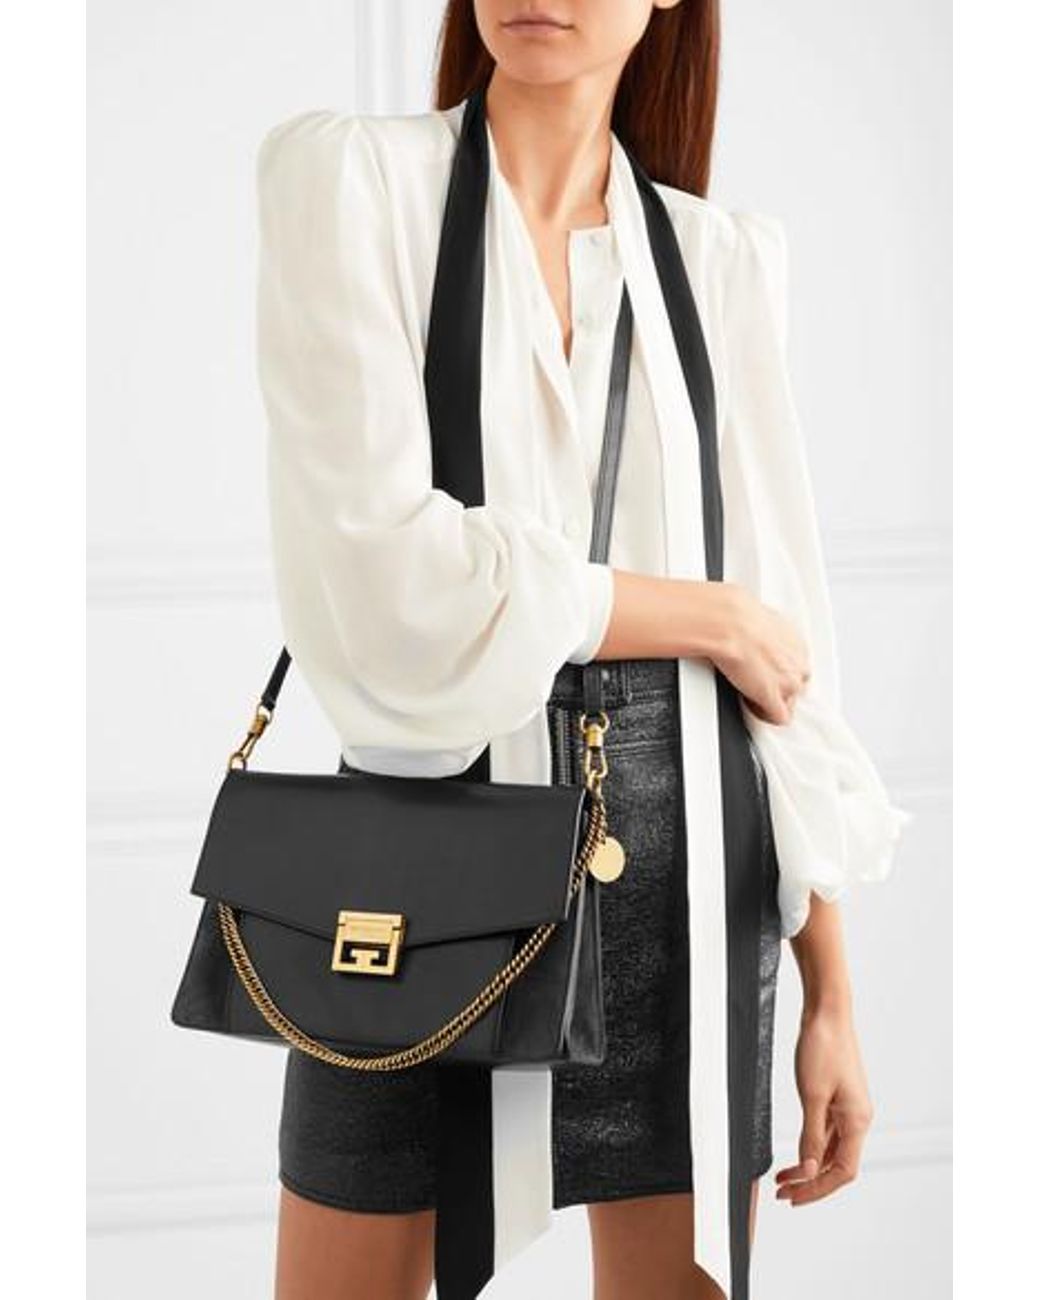 Givenchy Gv3 Medium Leather And Suede Shoulder Bag in Black | Lyst